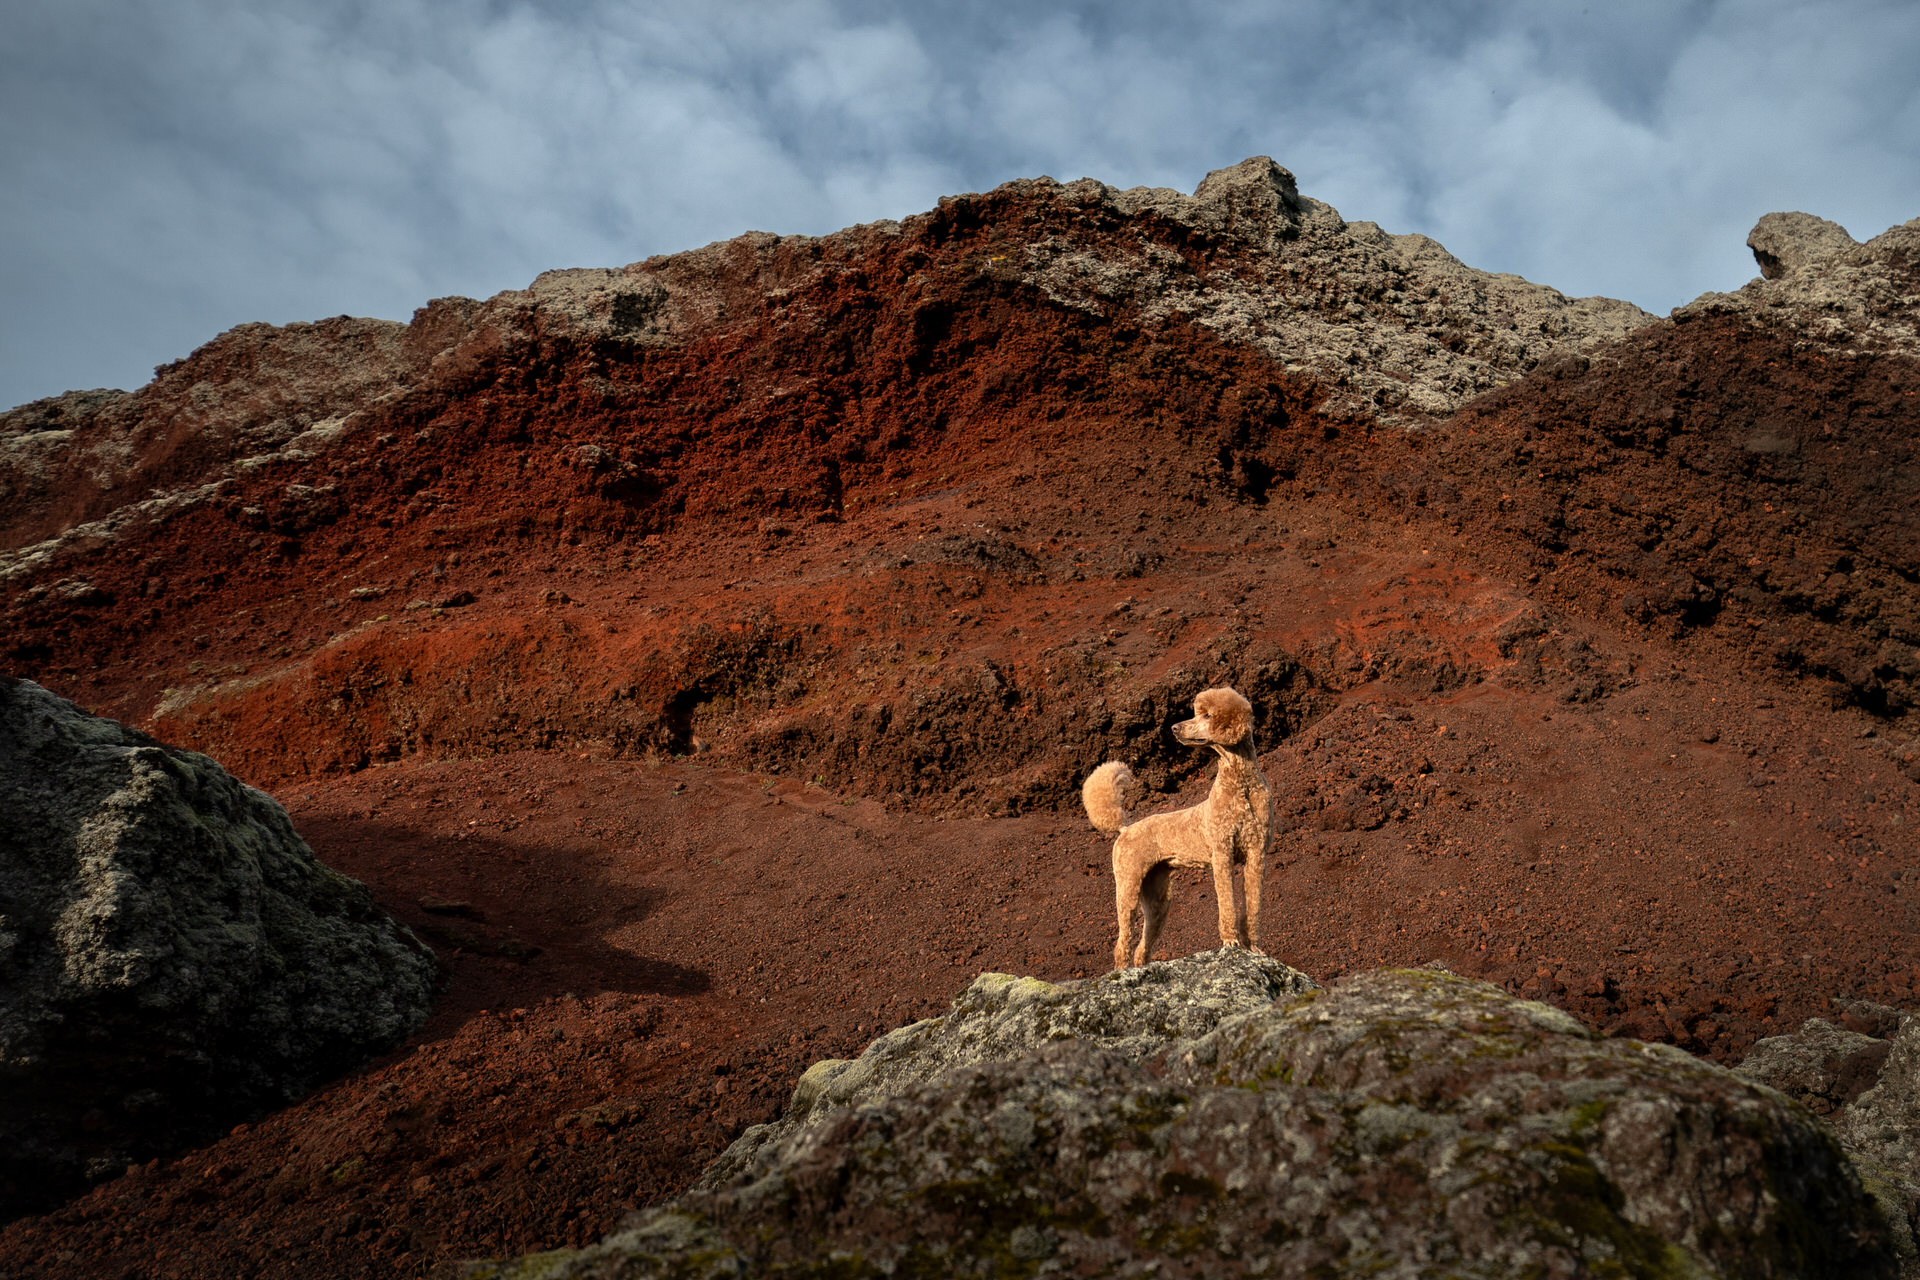 Dog on red rocky terrain under cloudy sky in Iceland